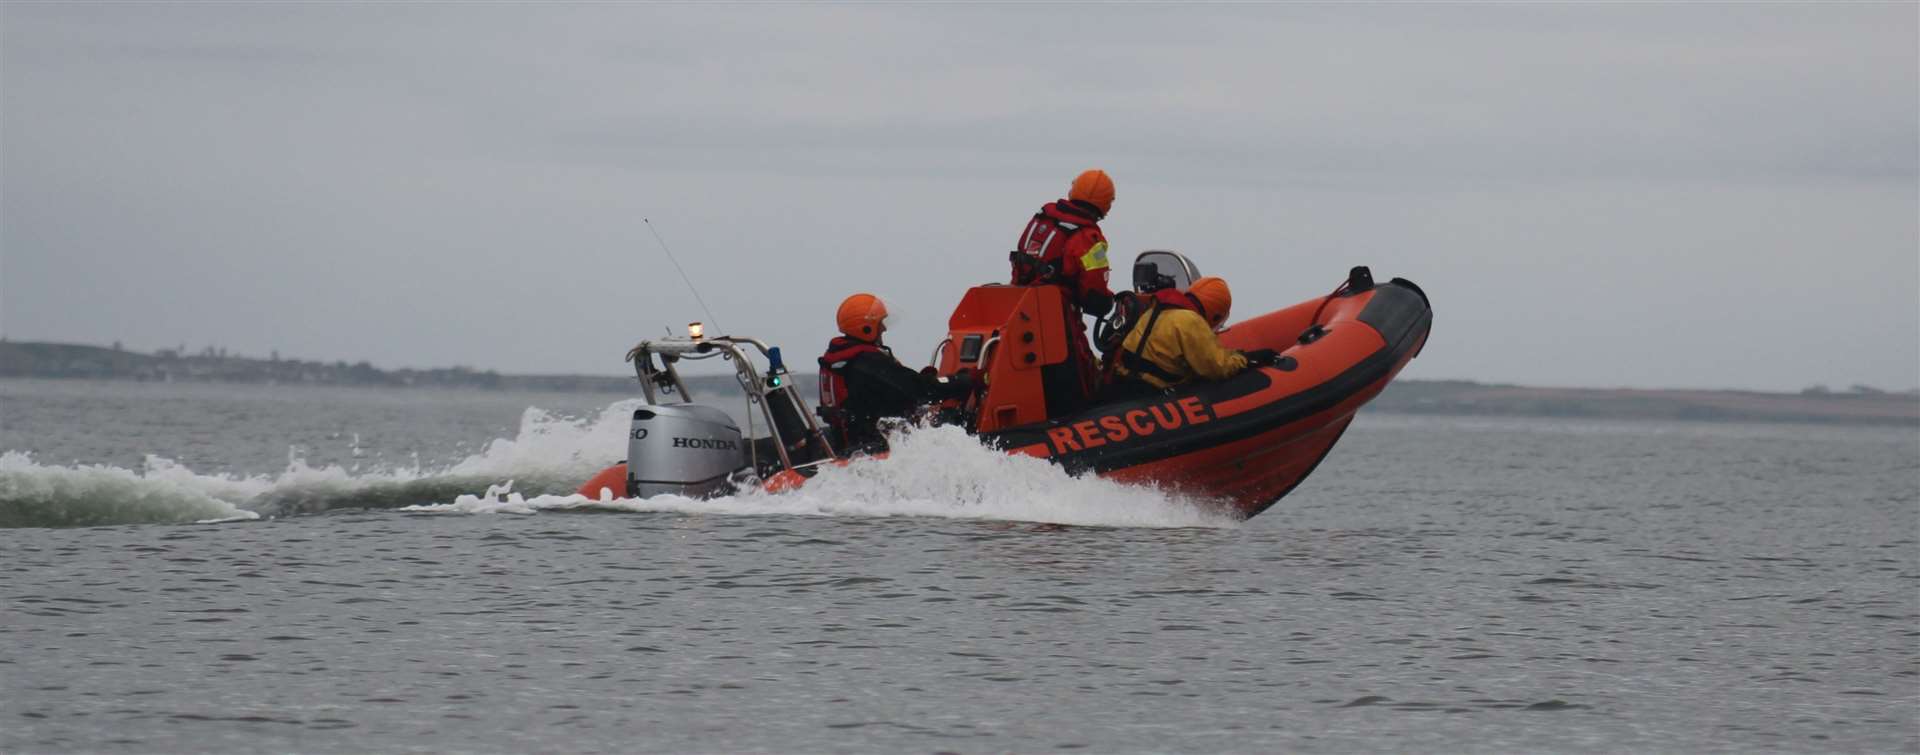 The ESRA lifeboat on a call-out.